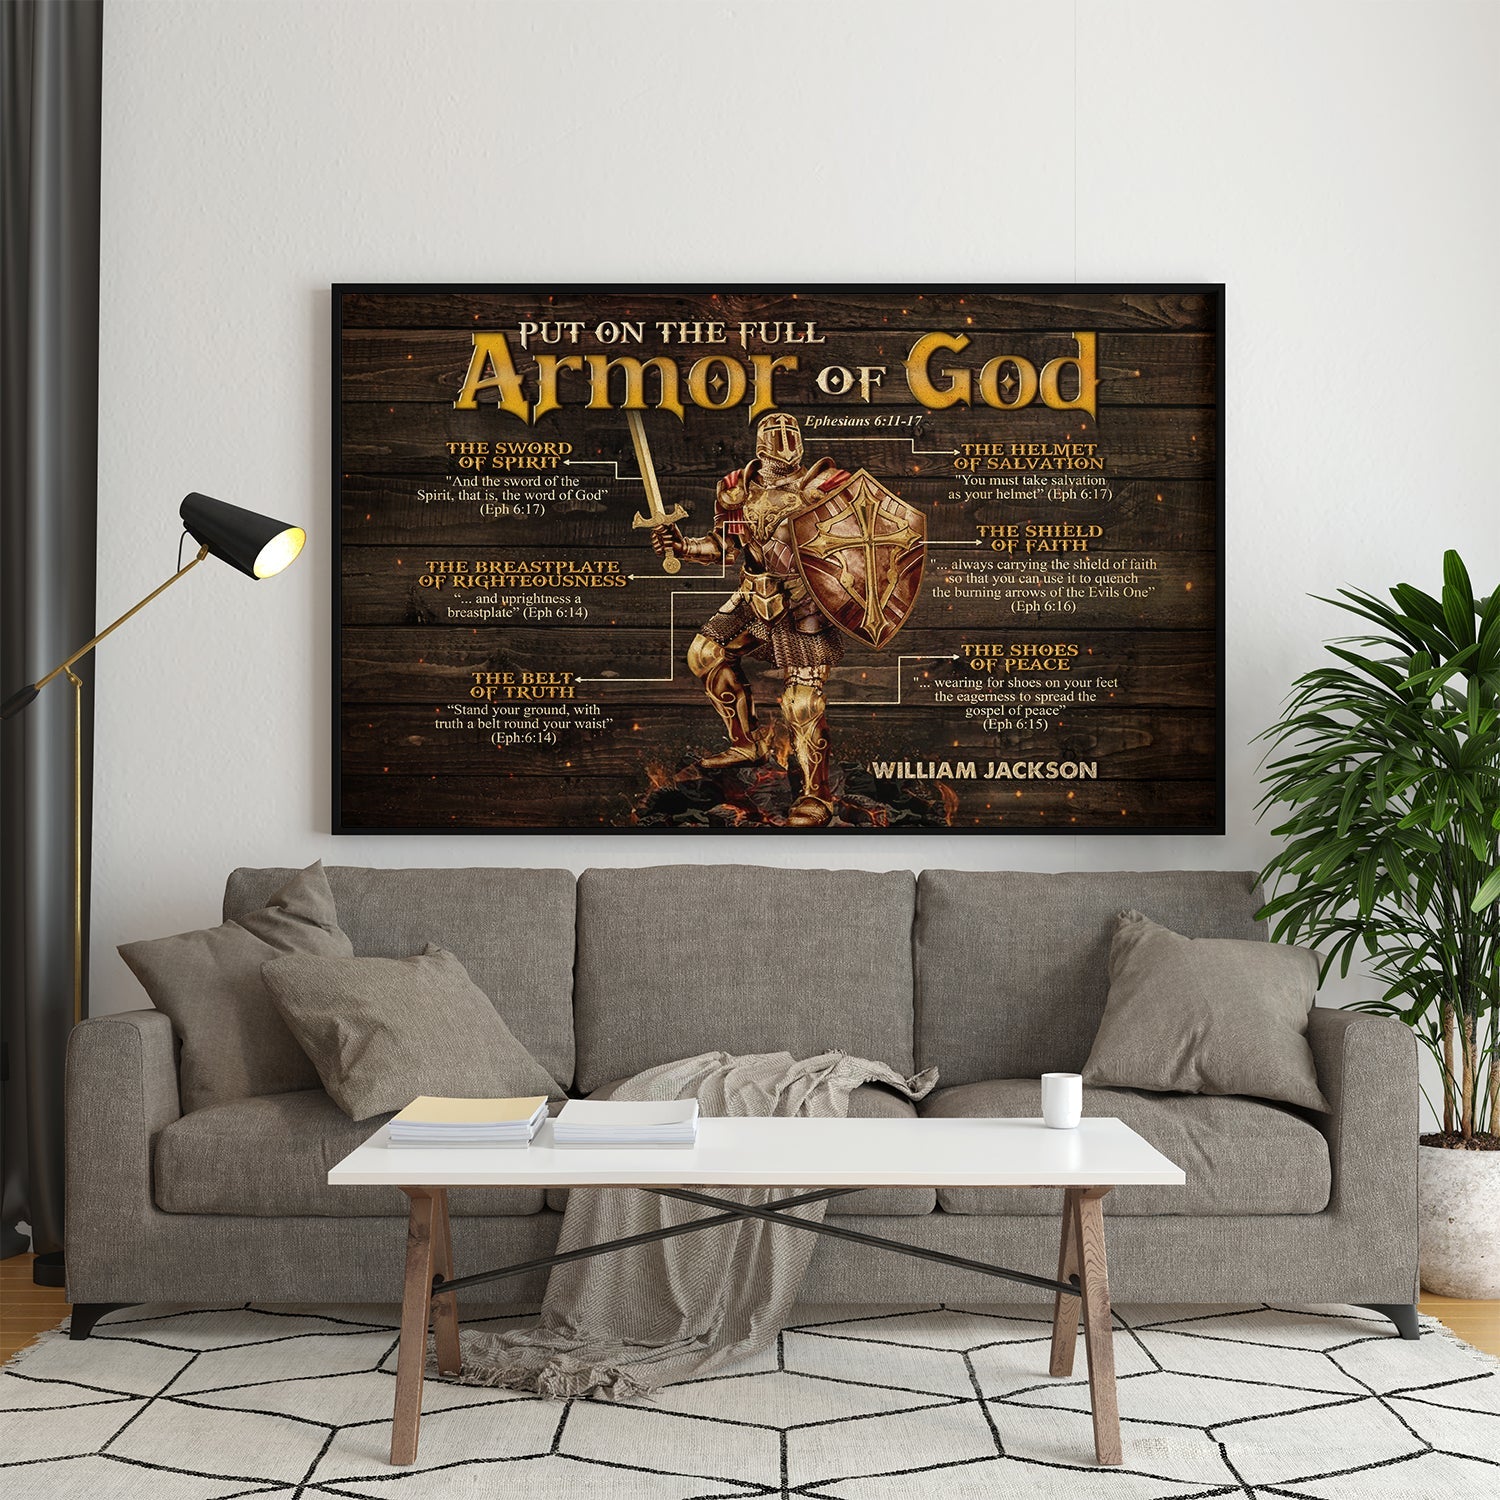 Personalized Warrior Of God Poster, Put On The Full Armor Of God, Armor Of God Bible Verse Poster